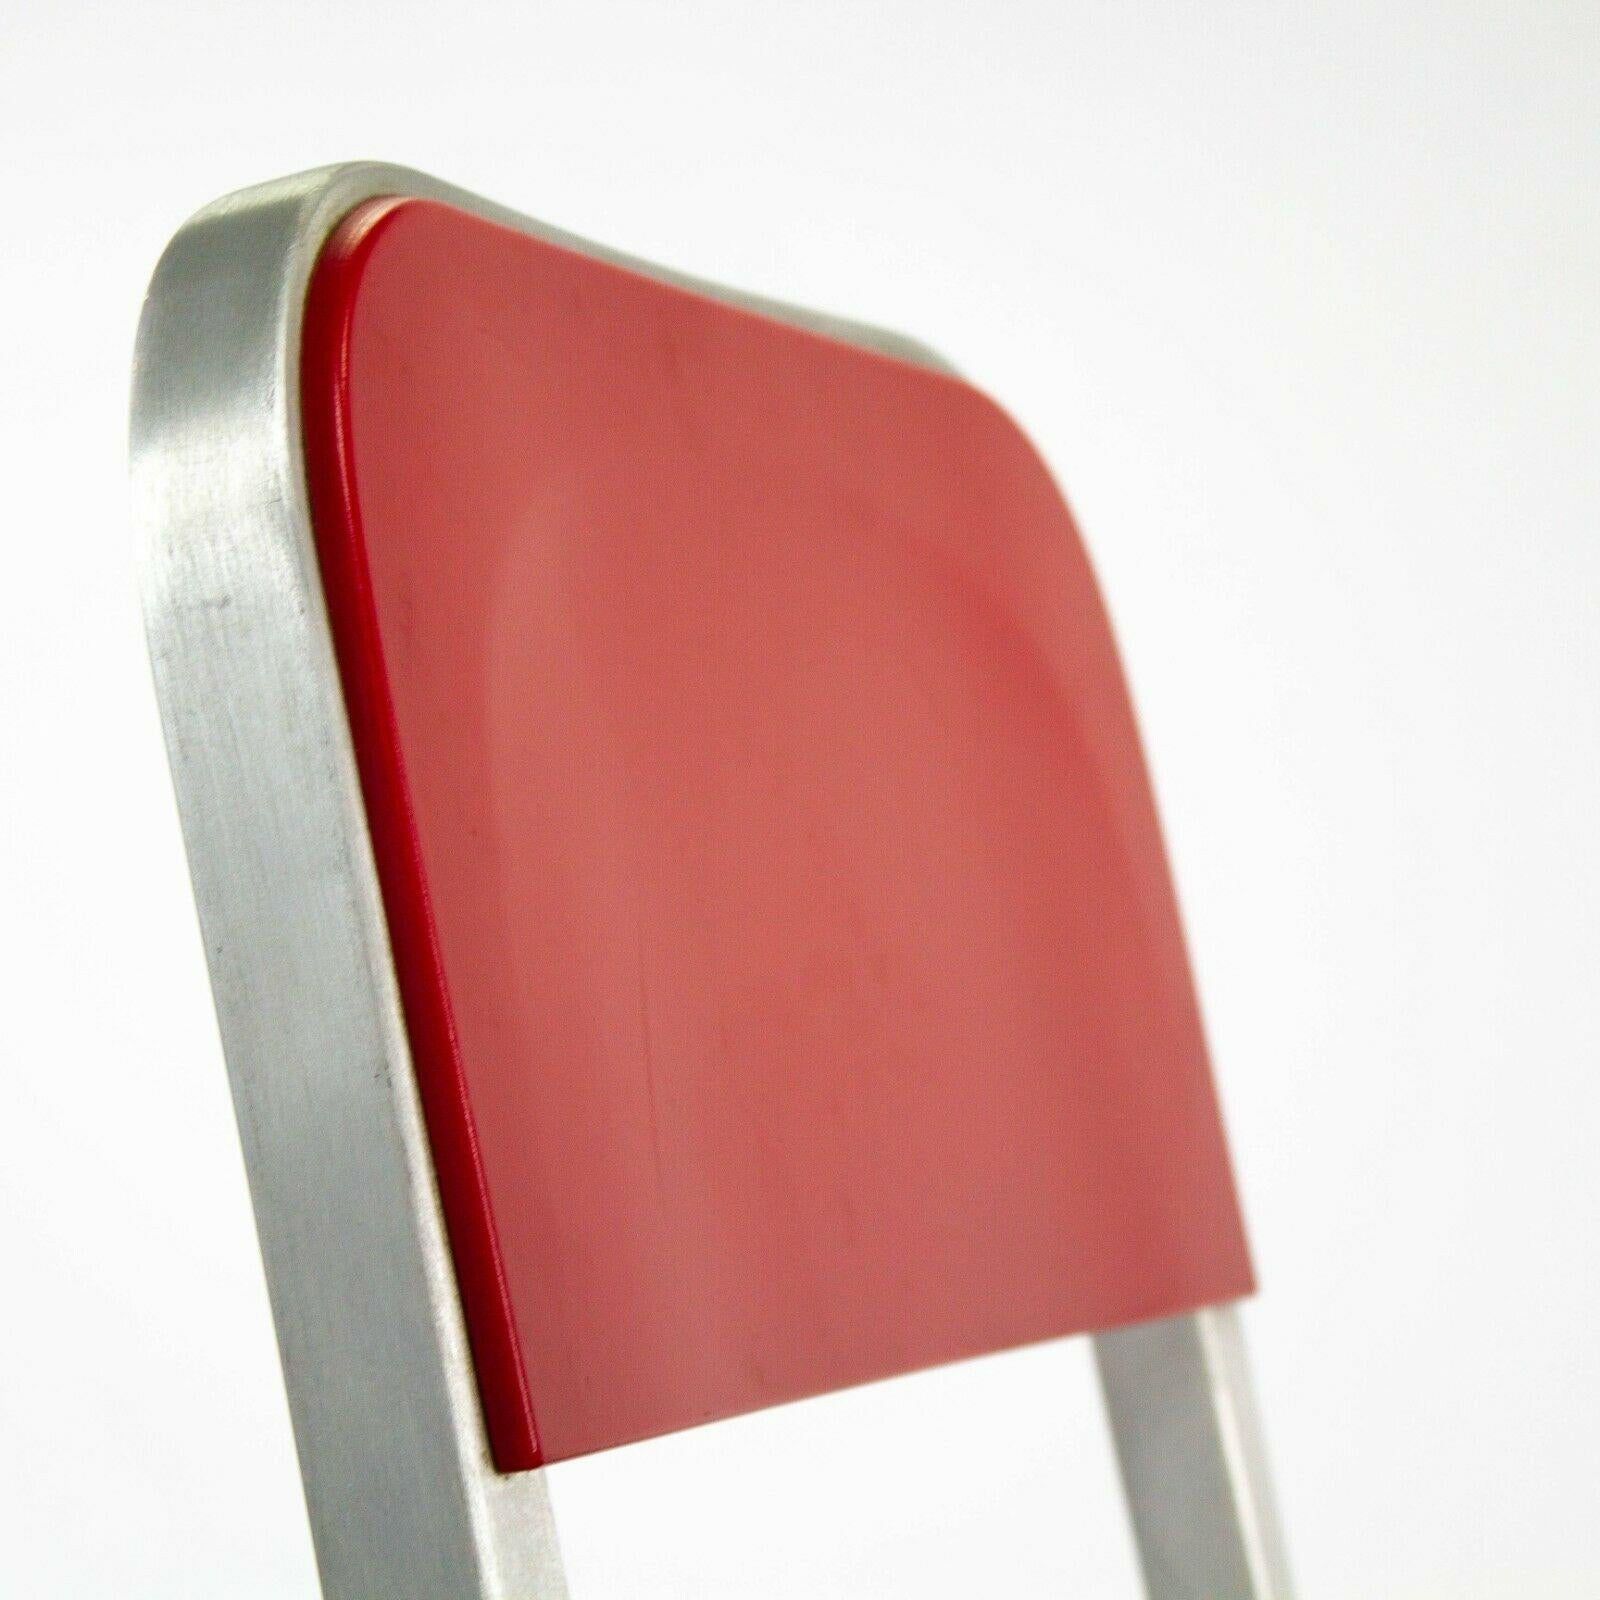 2010s Emeco 1951 Red Counter Stool by Adrian van Hooydonk and BMW Designworks For Sale 5